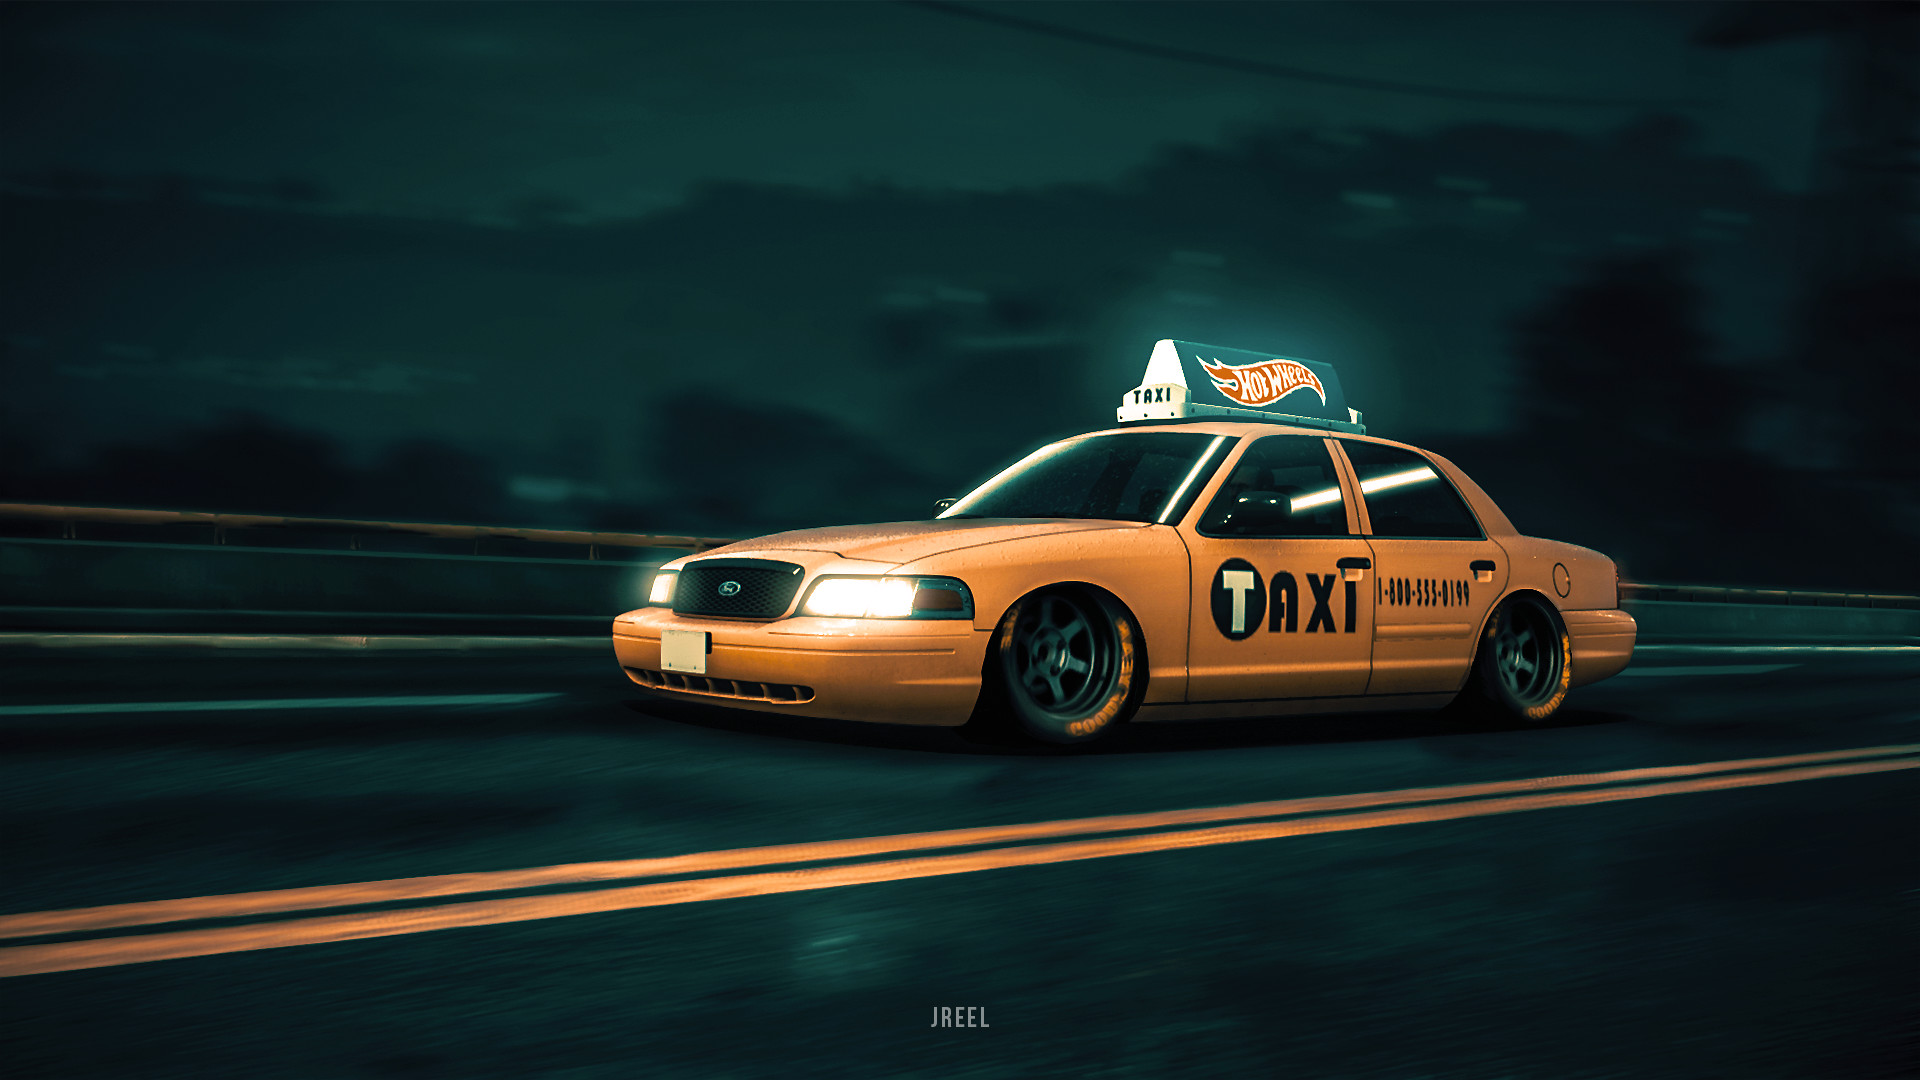 100+] Taxi Wallpapers | Wallpapers.com